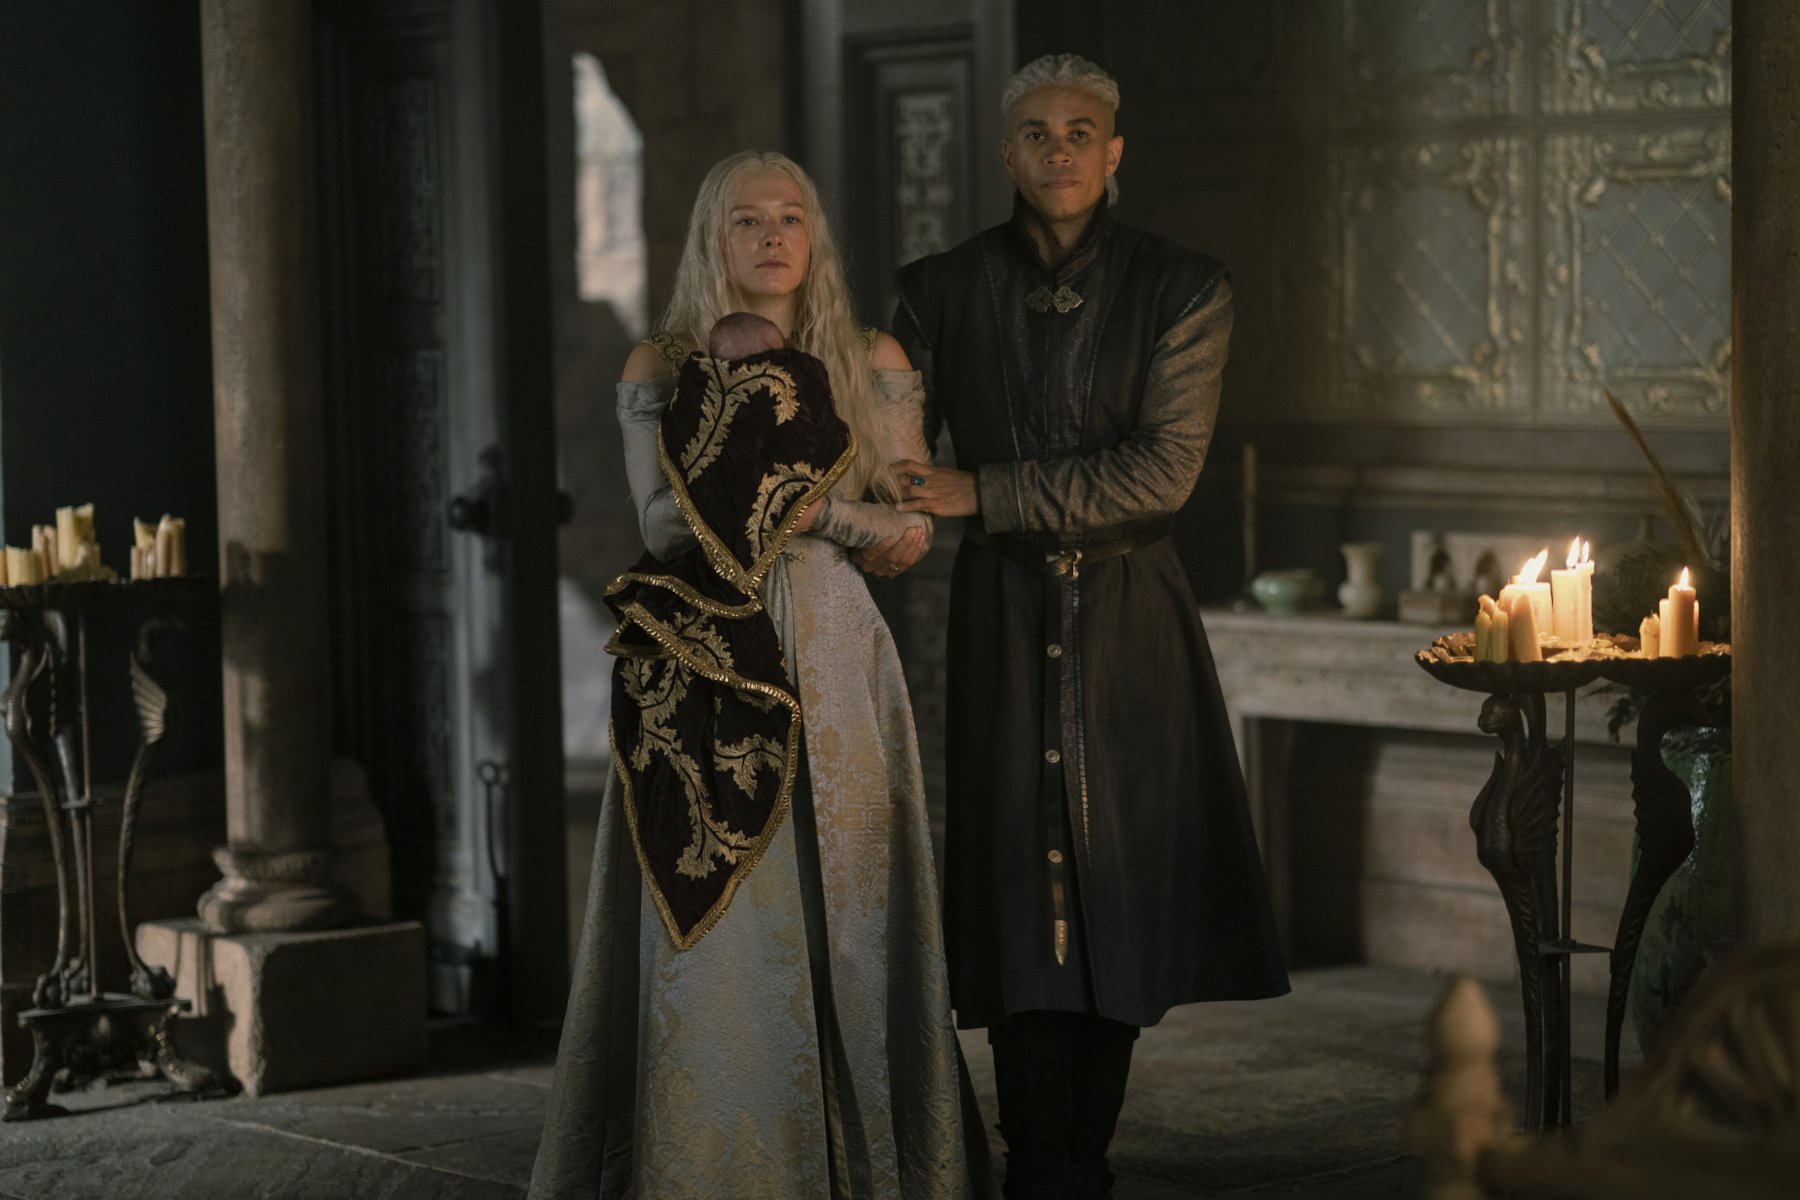 Emma D'Arcy and John MacMillan as Rhaenyra and Laenor in 'House of the Dragon' for our article about episode 7's release date. They're standing side by side, Rhaenyra is holding a baby, and Laenor has his hand on her arm.